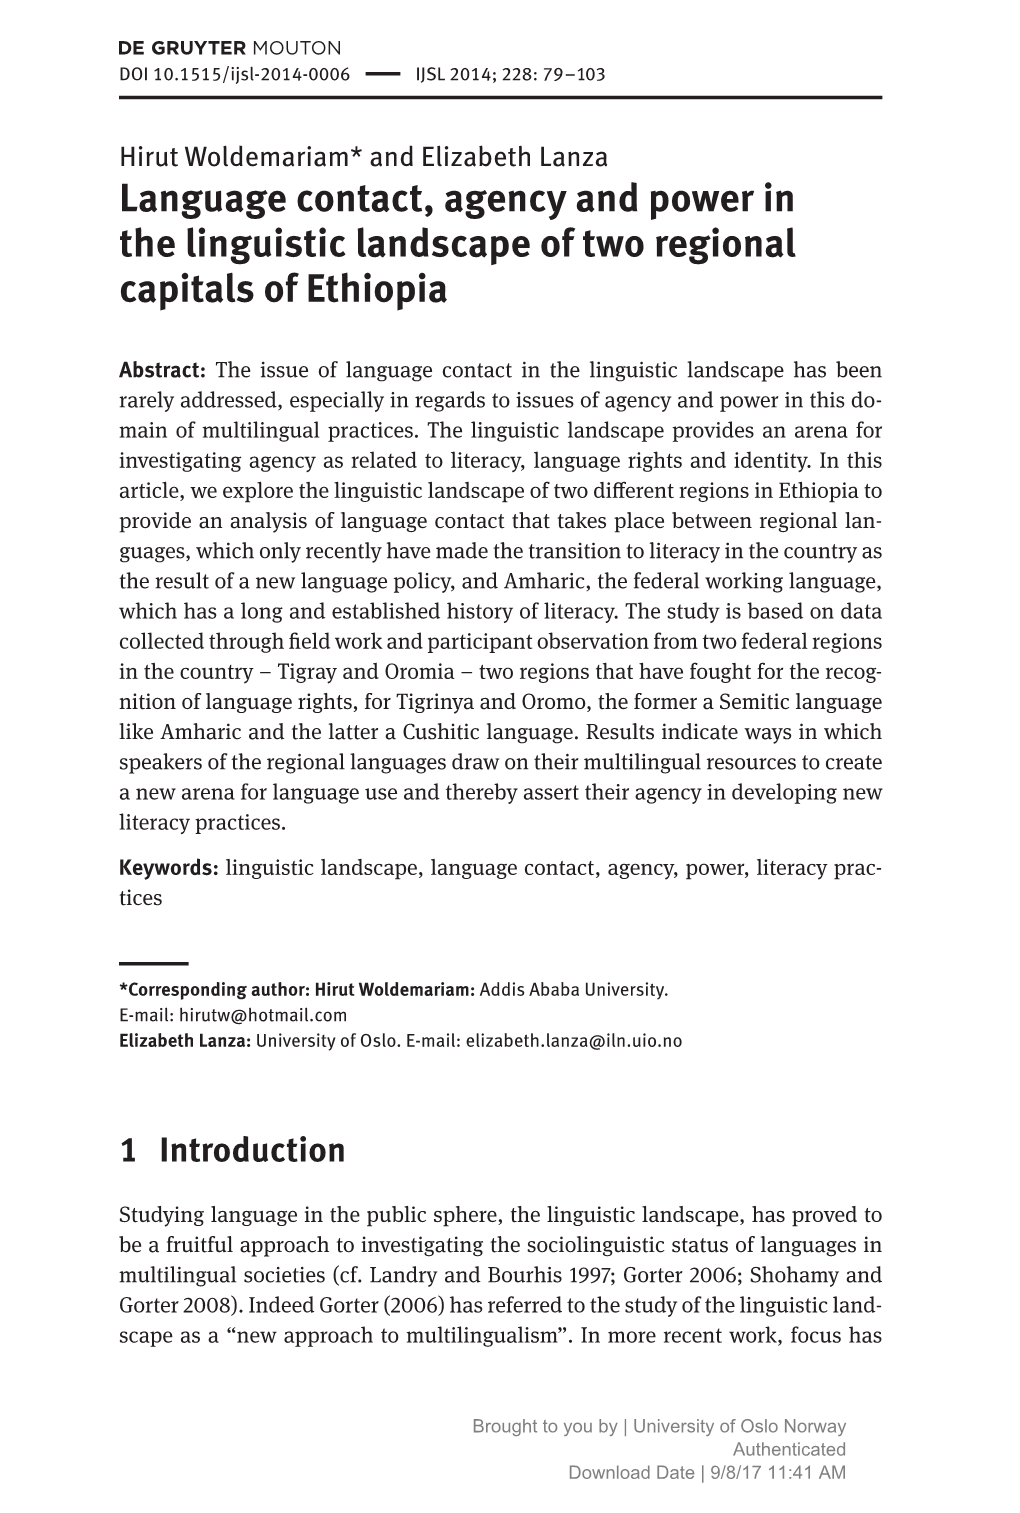 Language Contact, Agency and Power in the Linguistic Landscape of Two Regional Capitals of Ethiopia